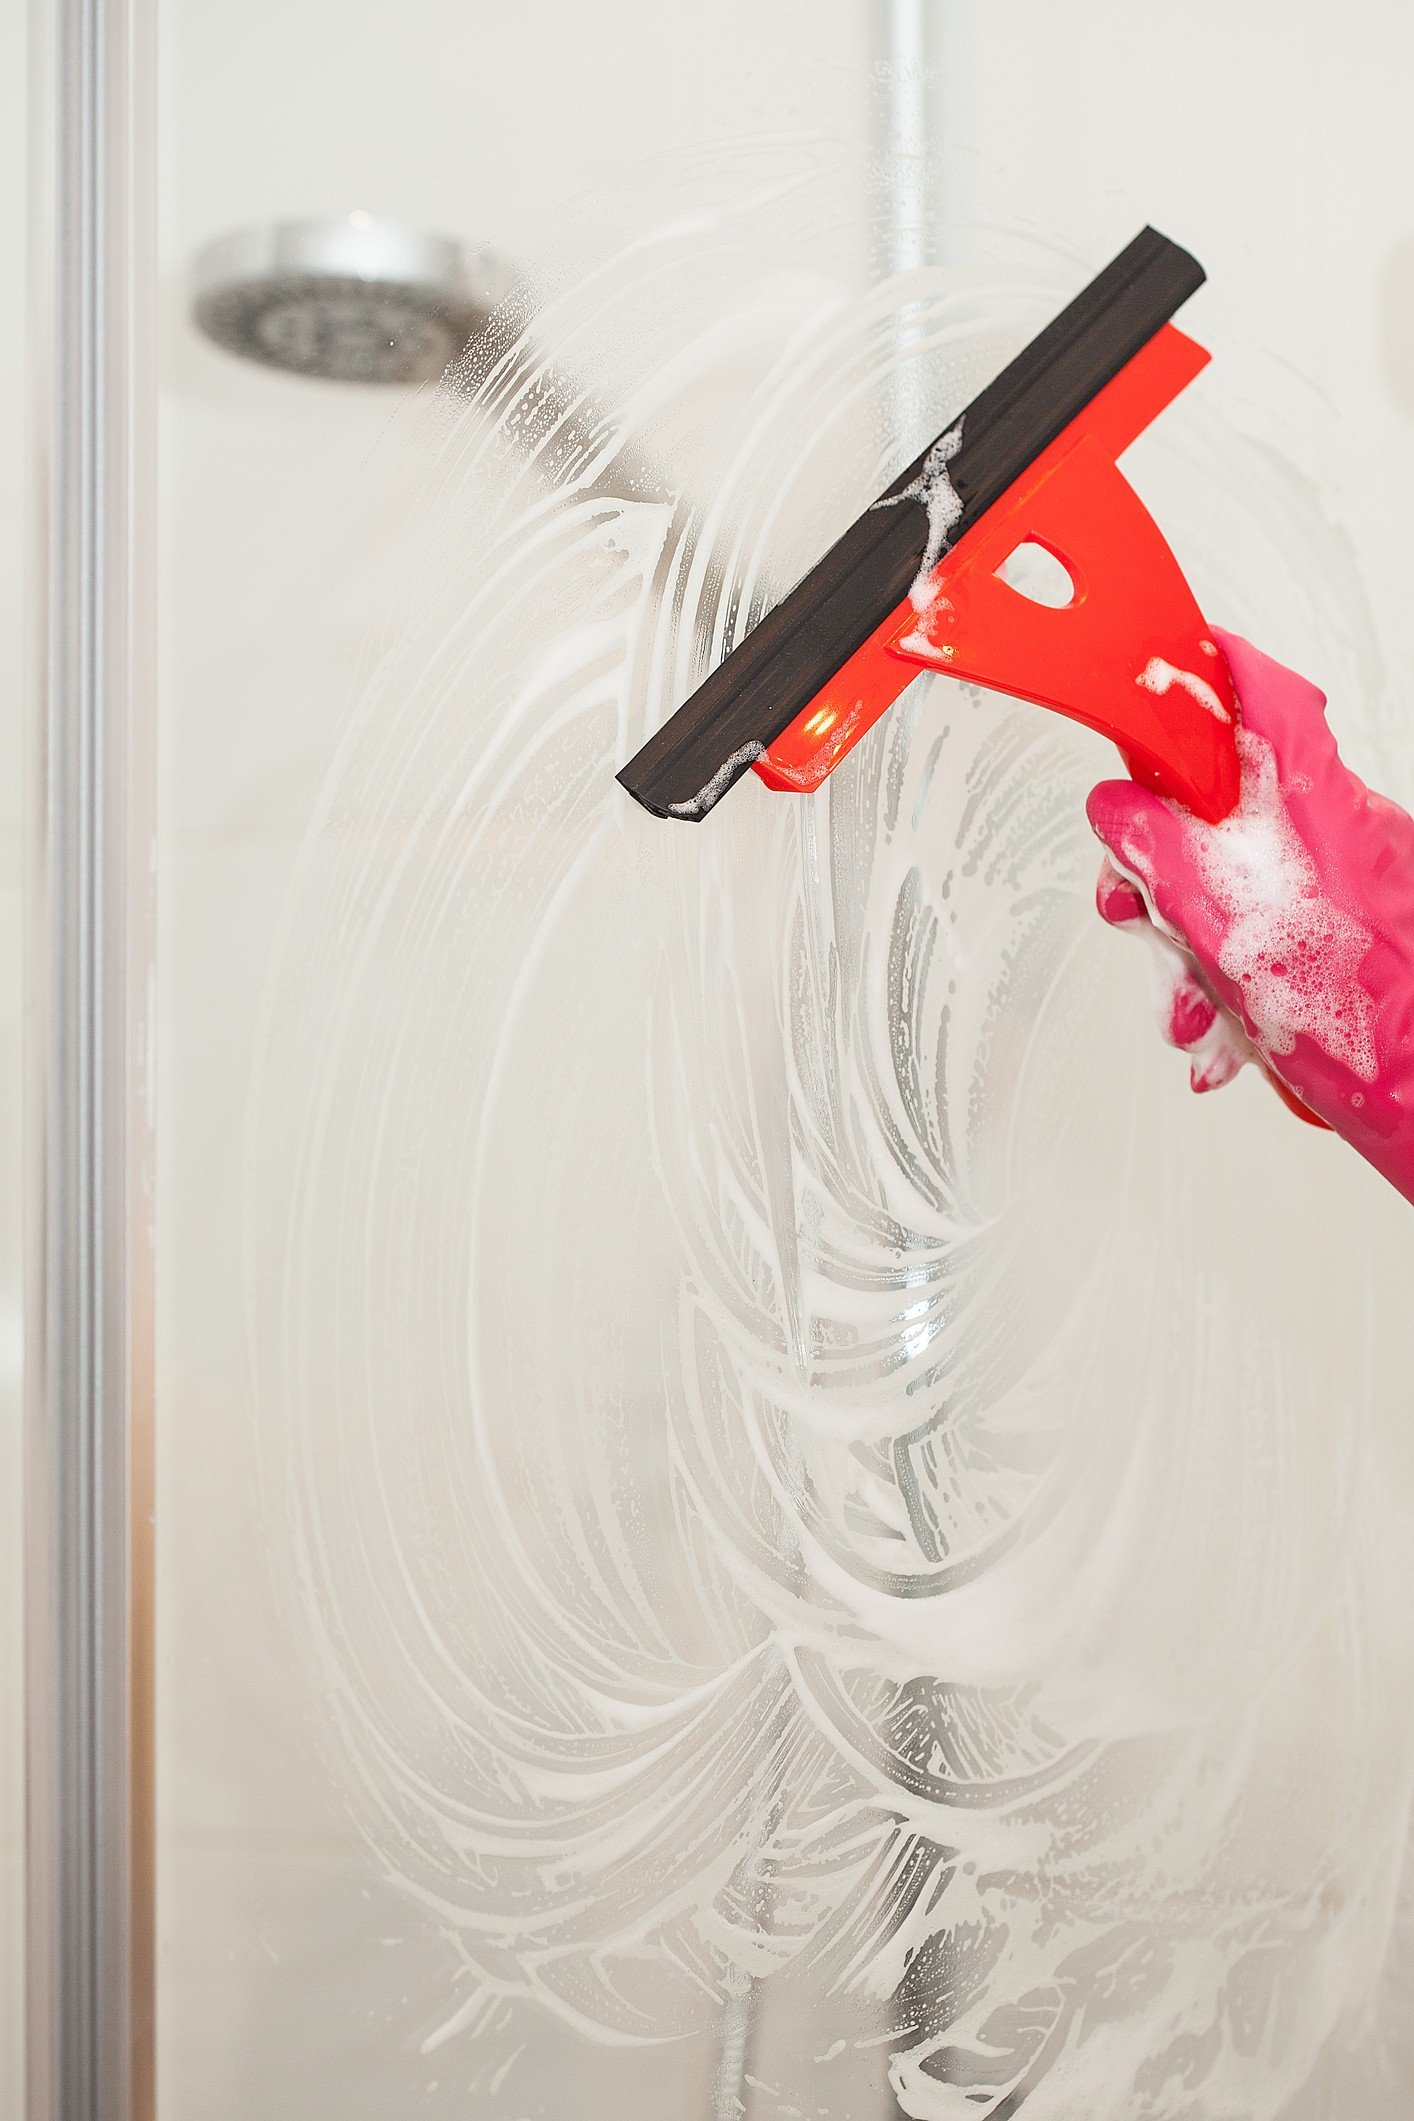 Shower cleaning with squeegee